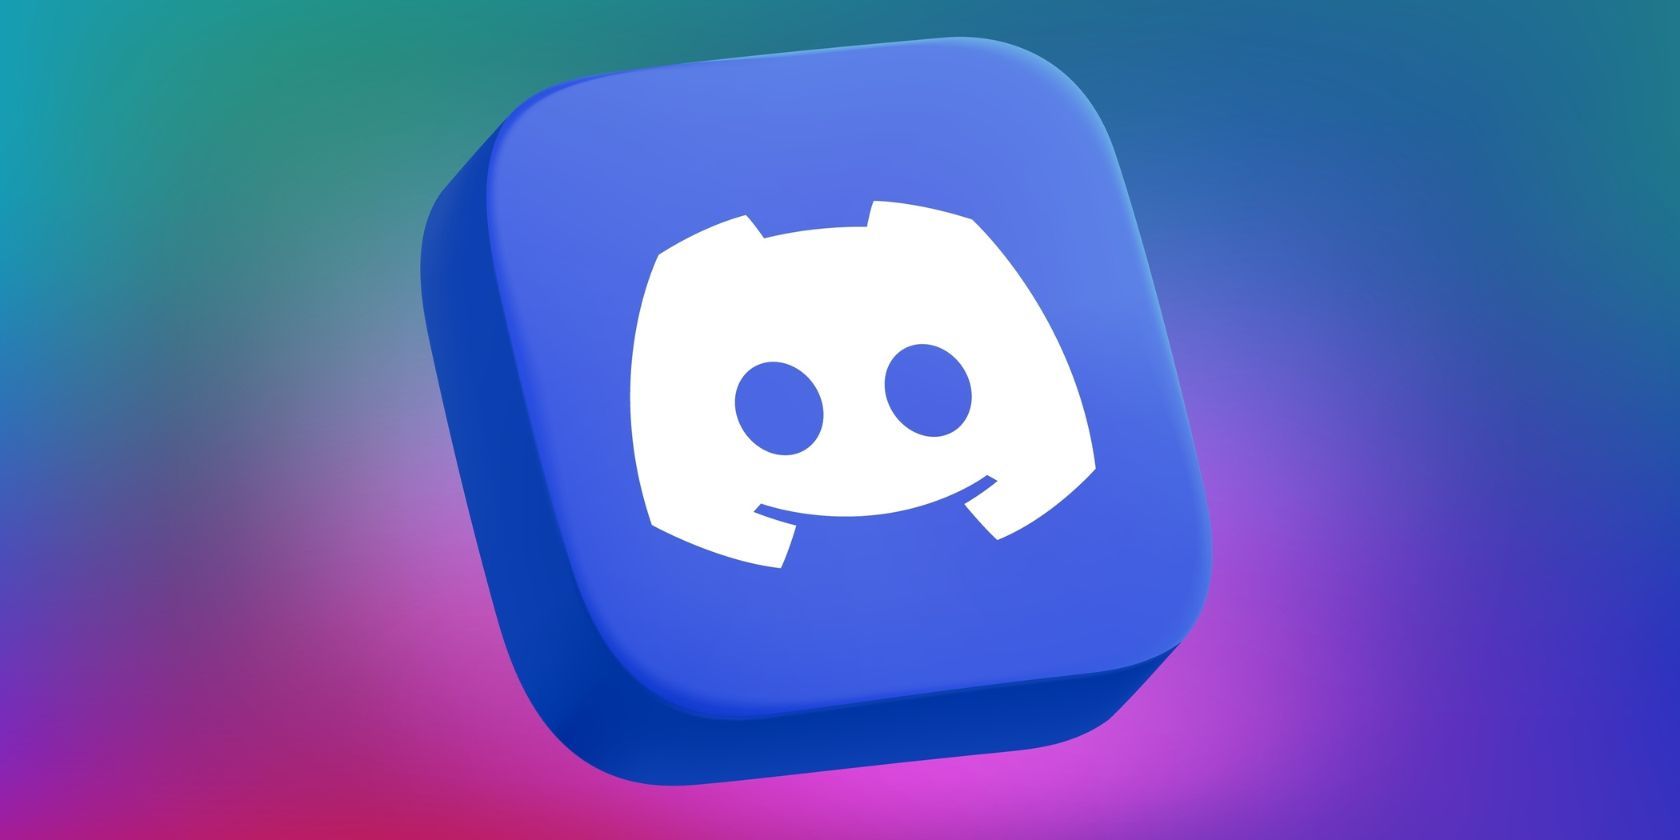 discord logo on a gradient background